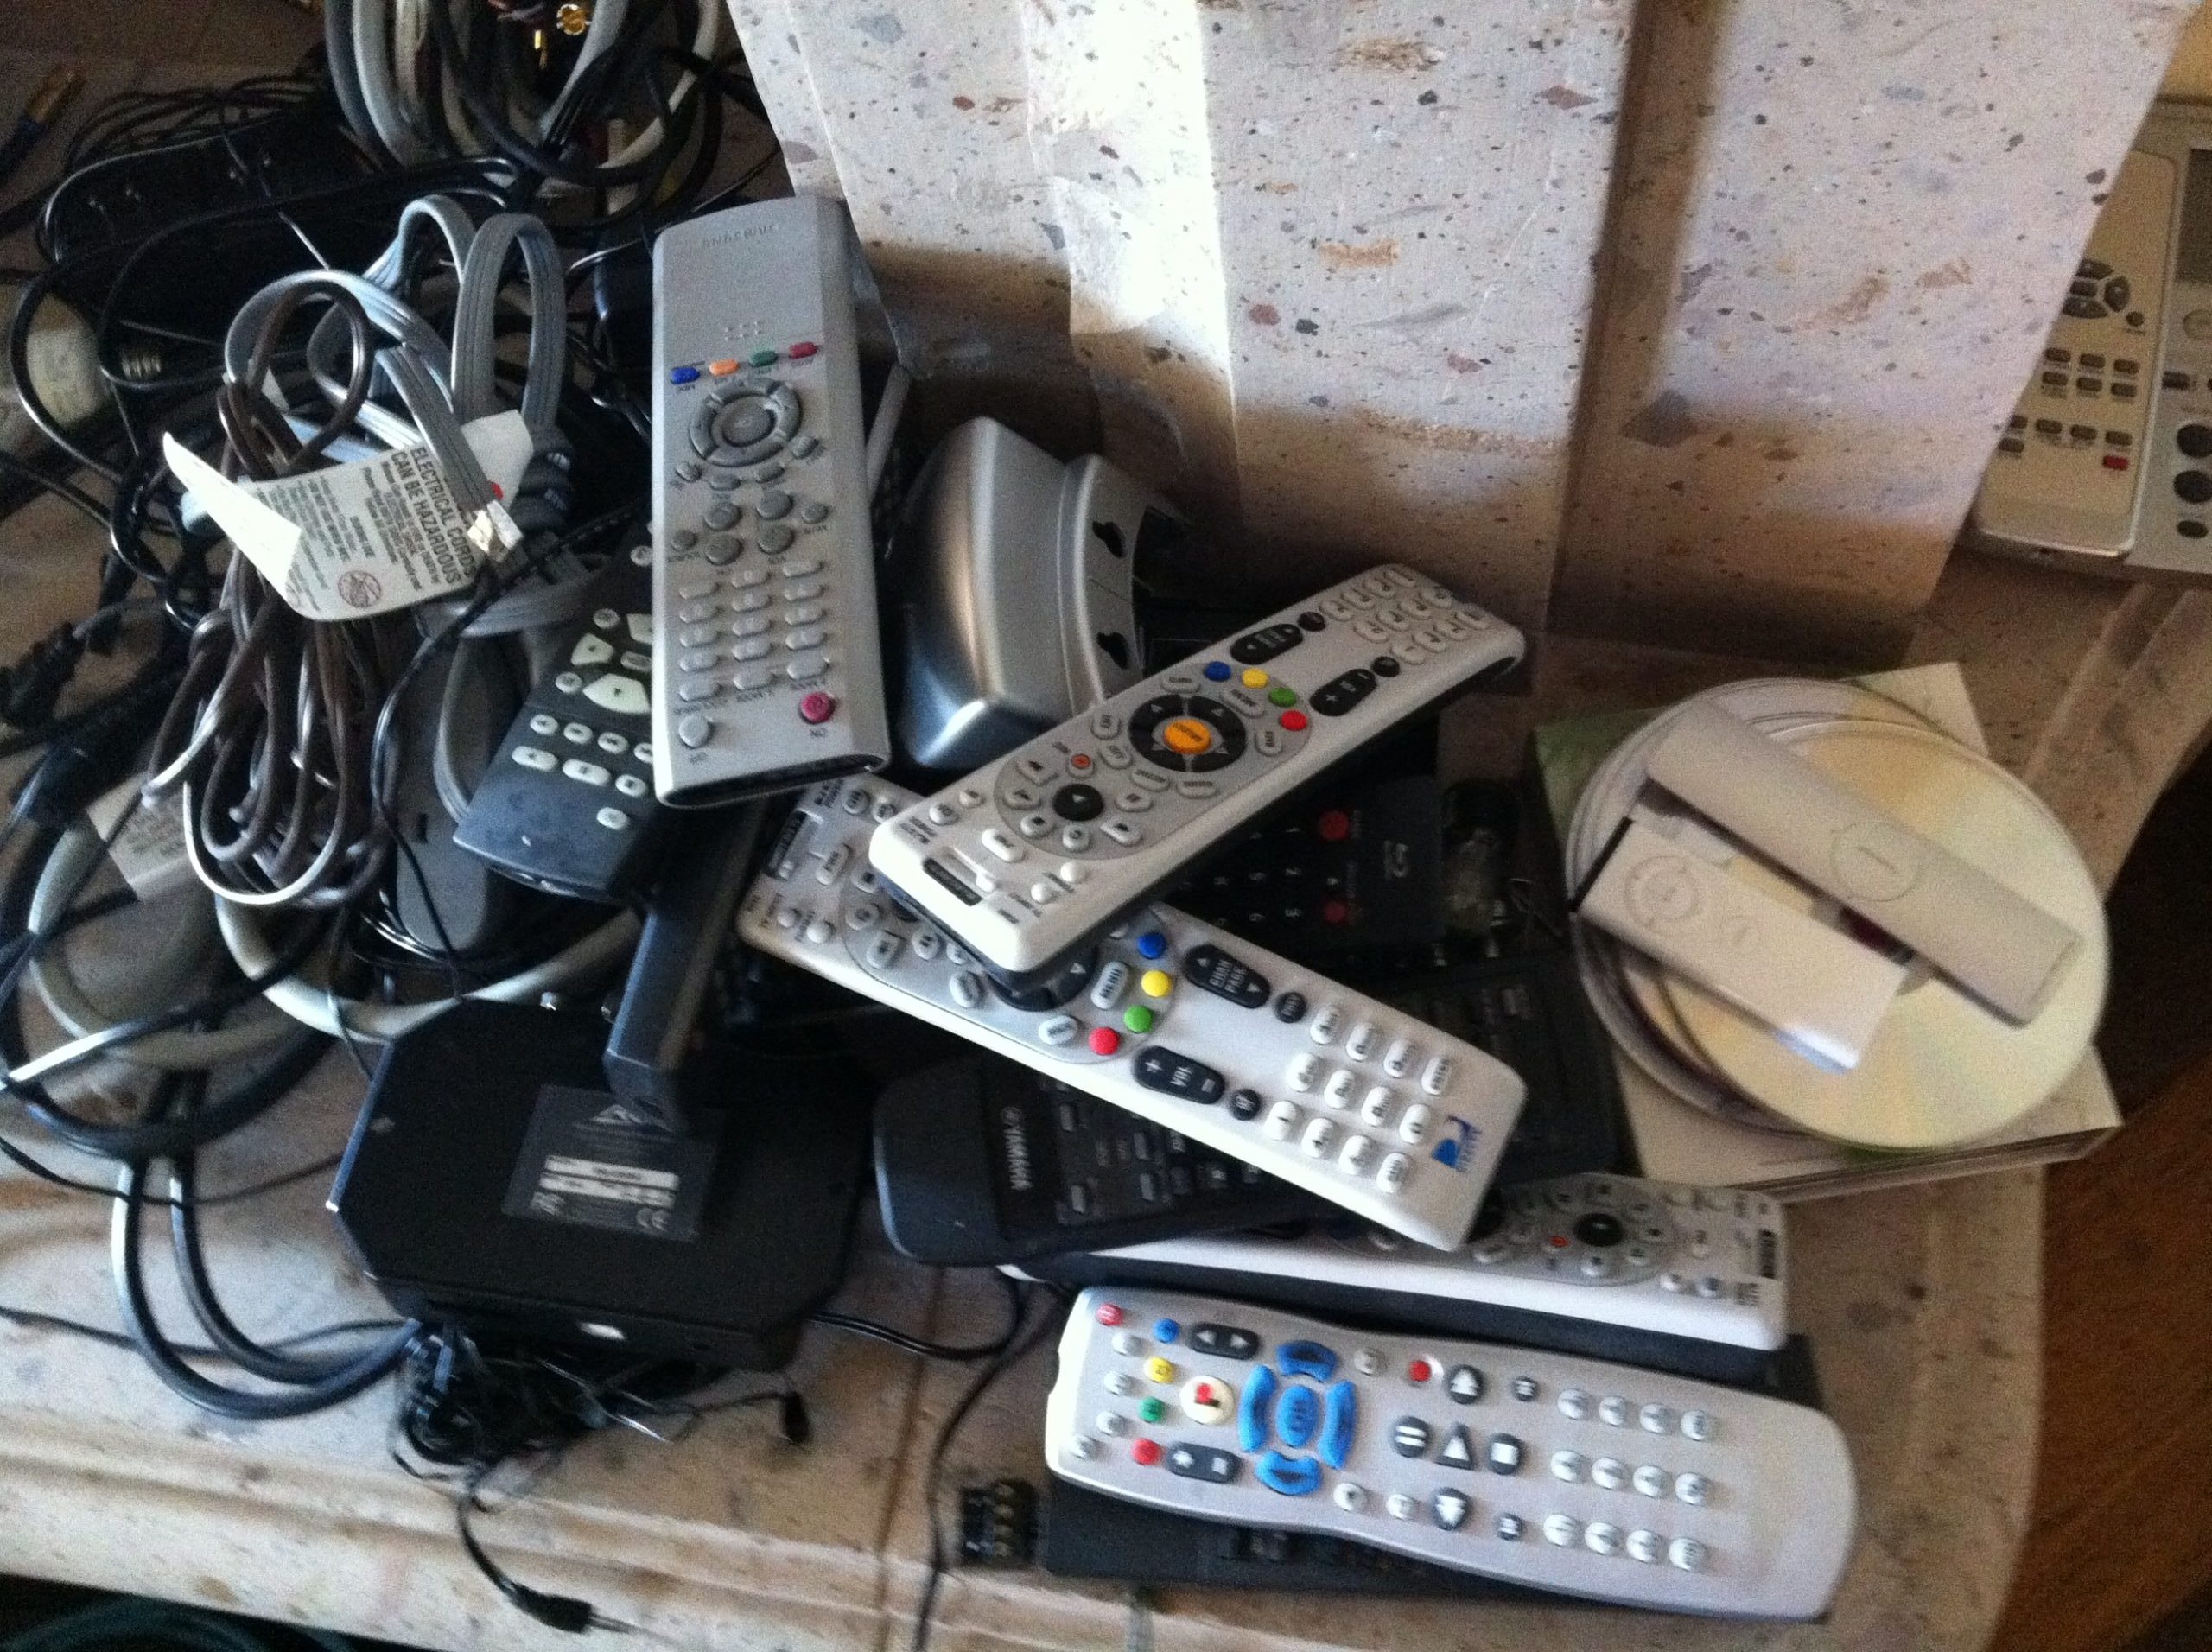 A pile of mostly remotes